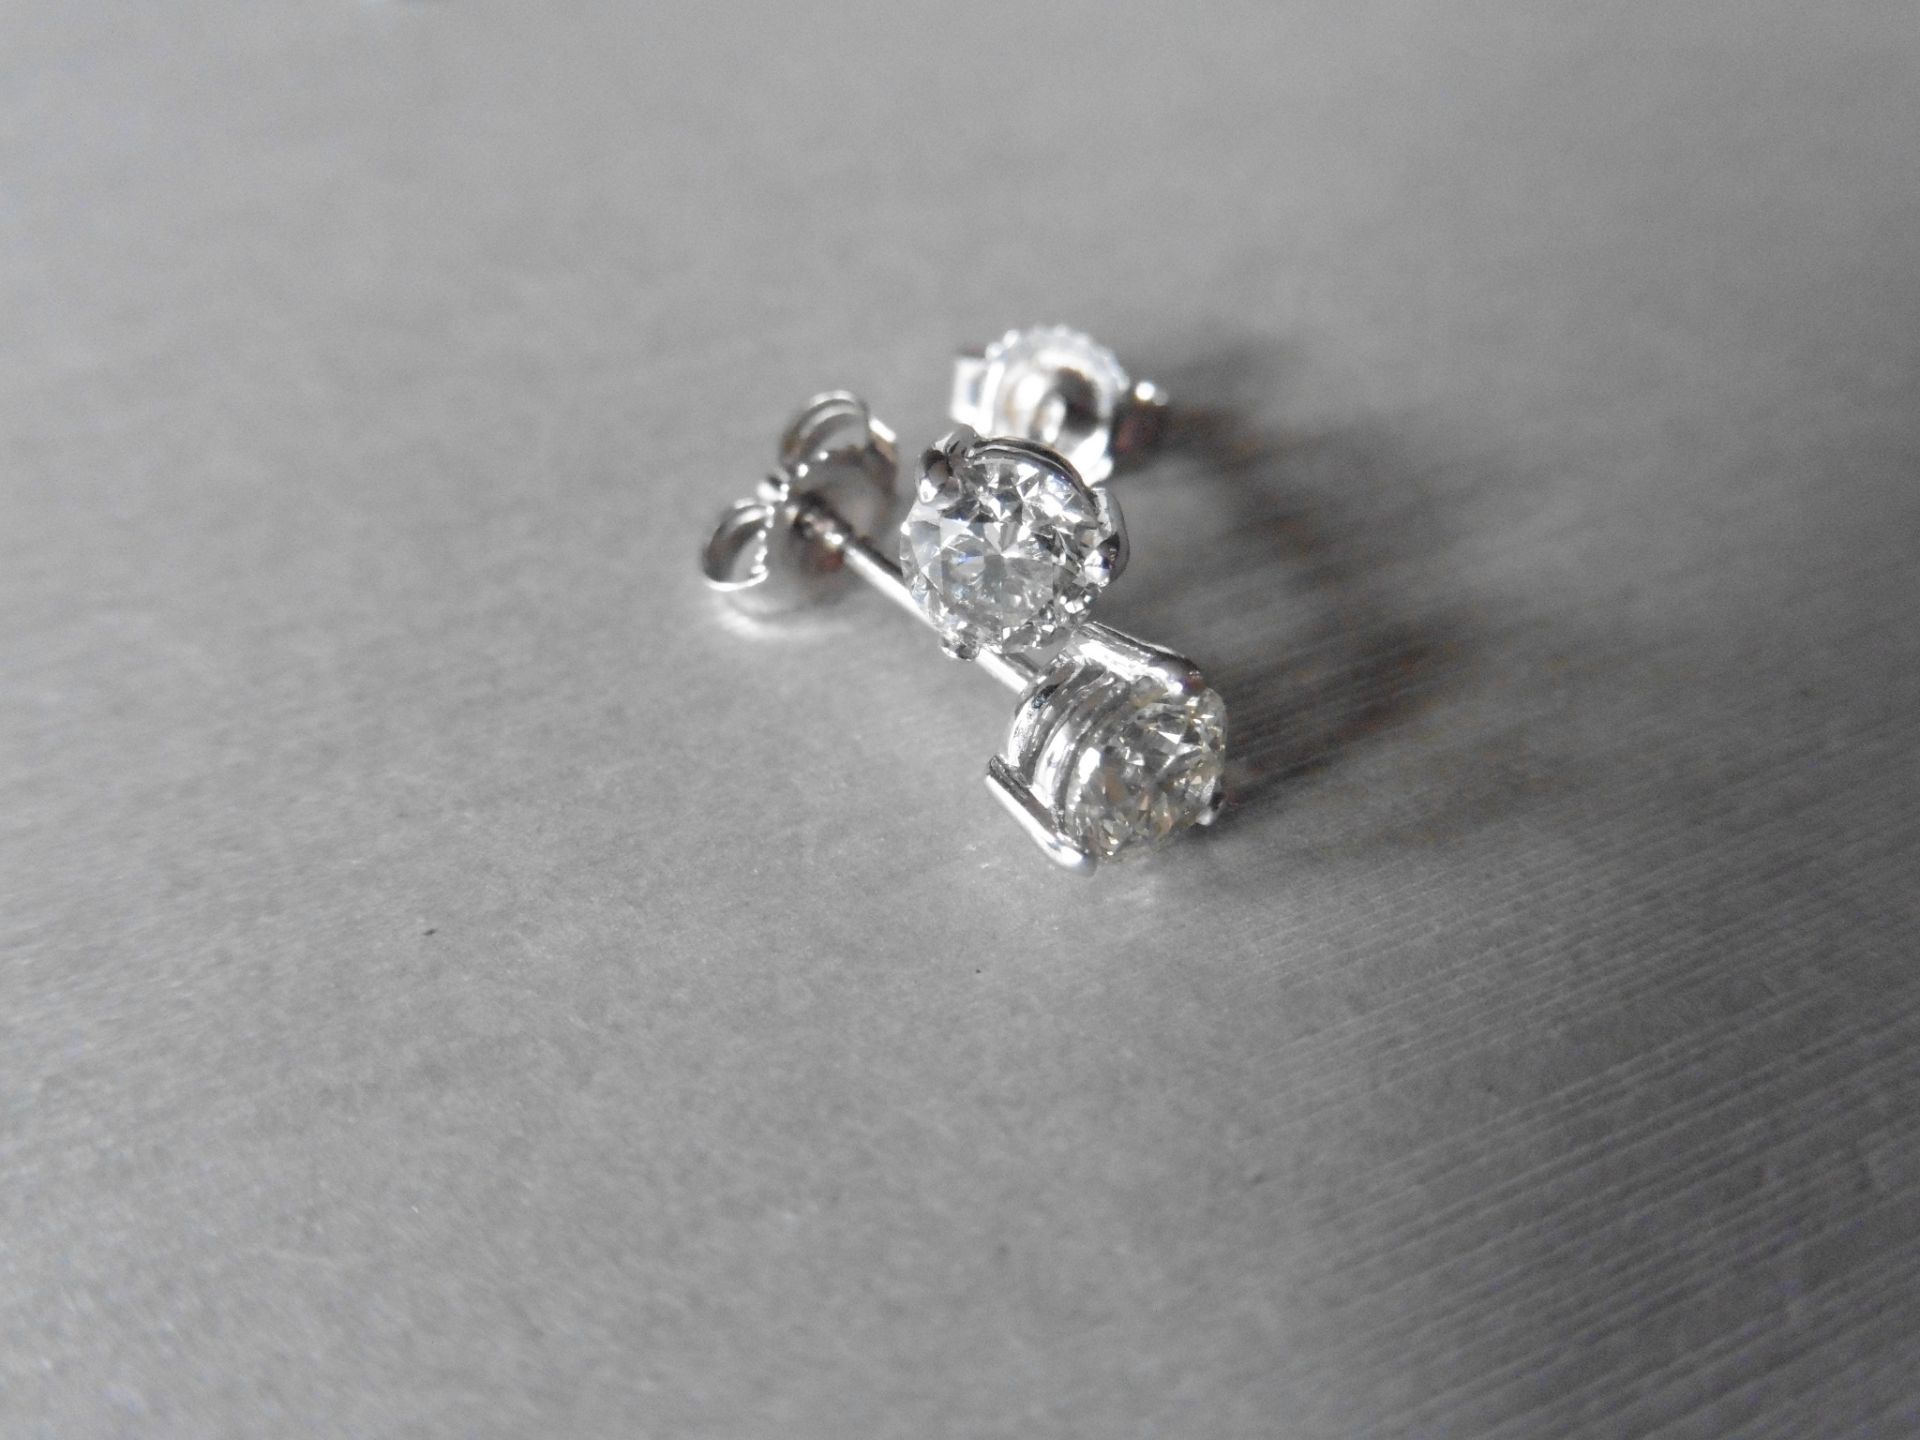 1.00ct Solitaire diamond stud earrings set with brilliant cut diamonds, SI2 clarity and I colour.